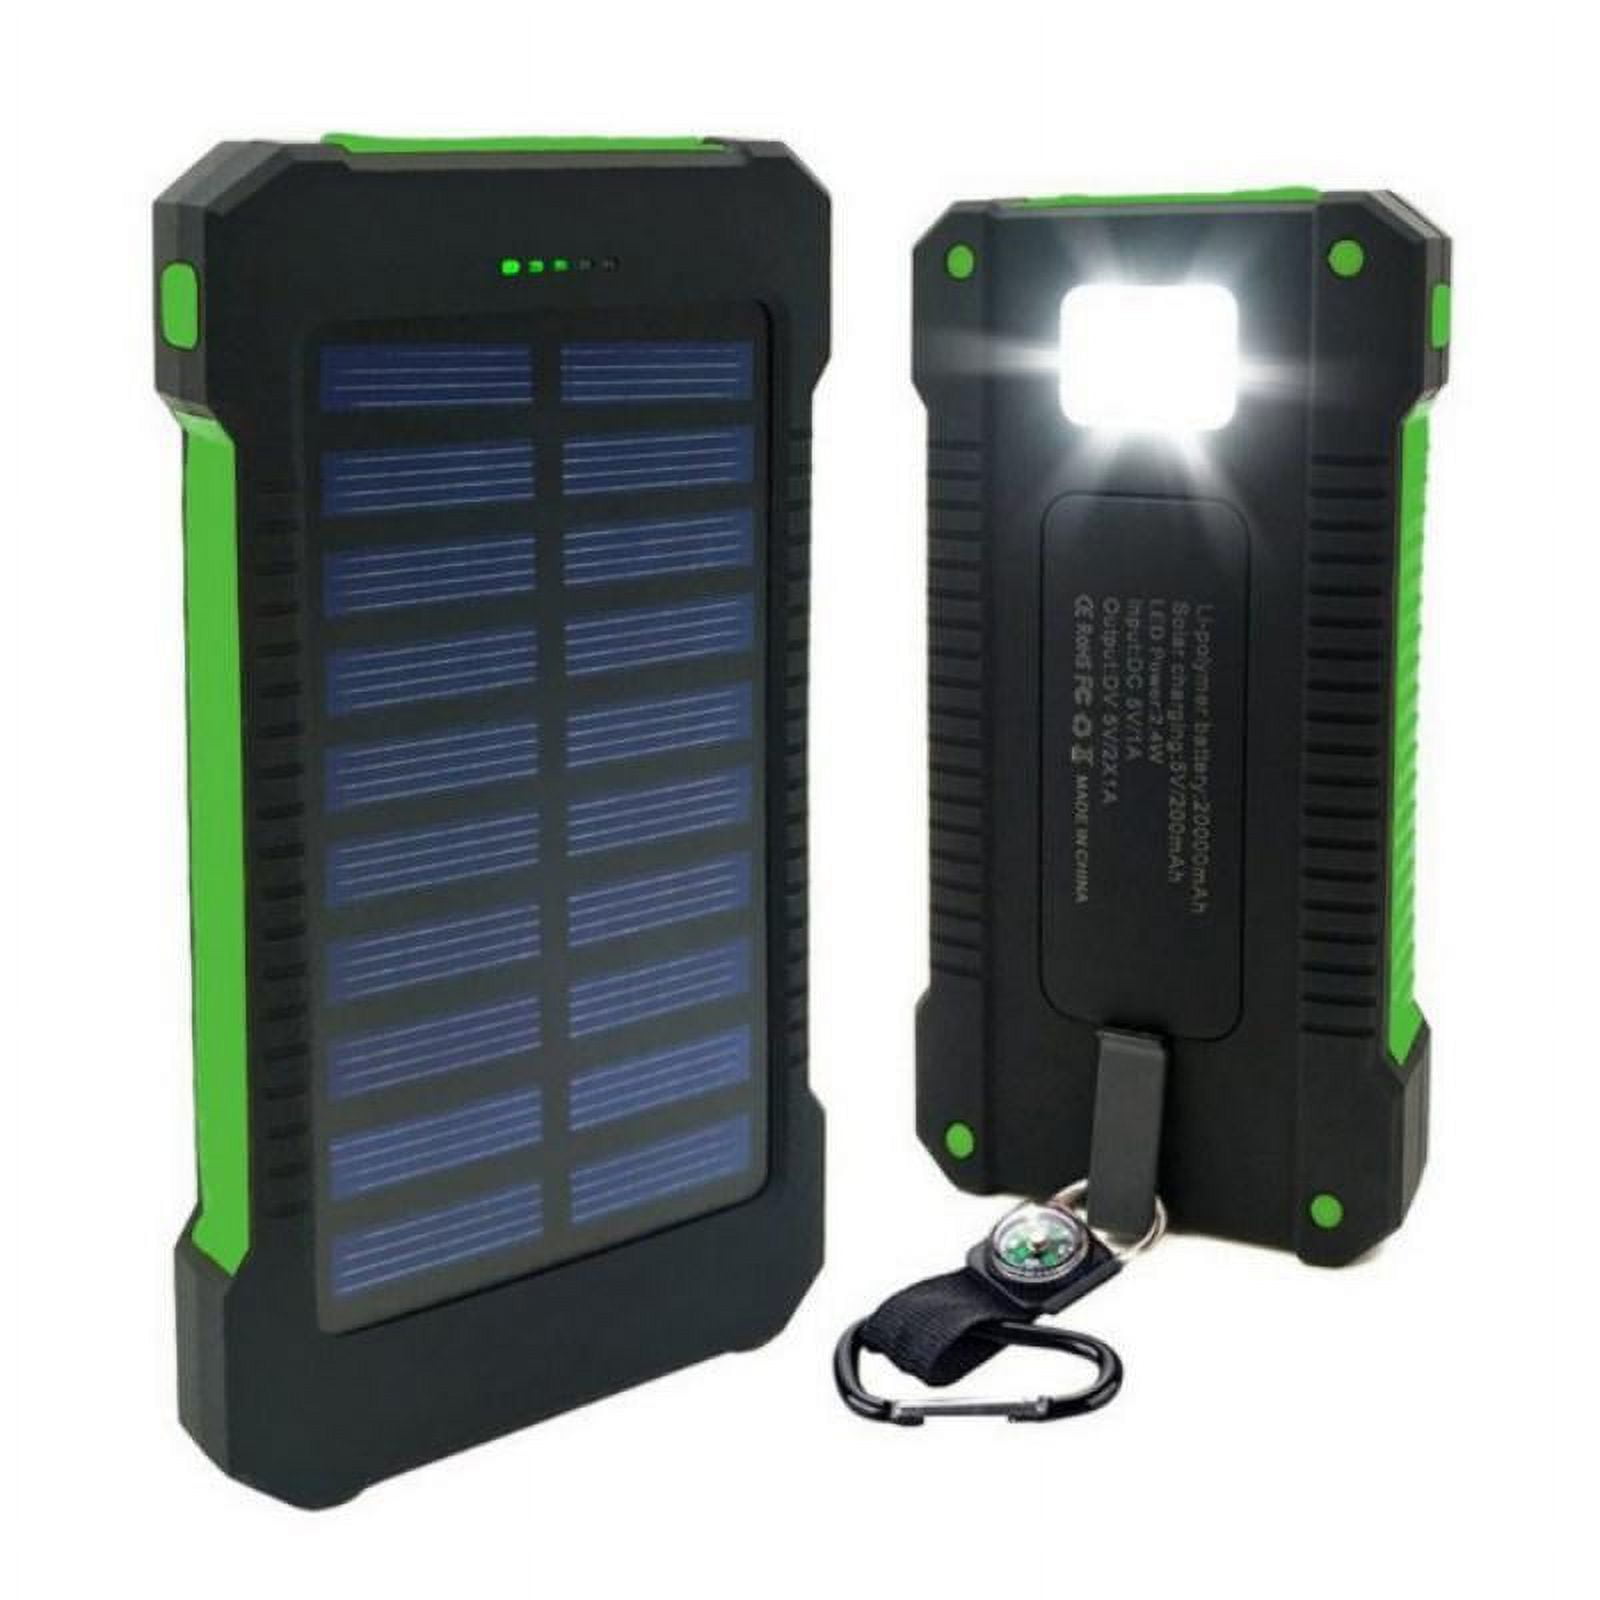 MetFut Solar Power Bank 38800mAh, Solar Charger with Suction Cup